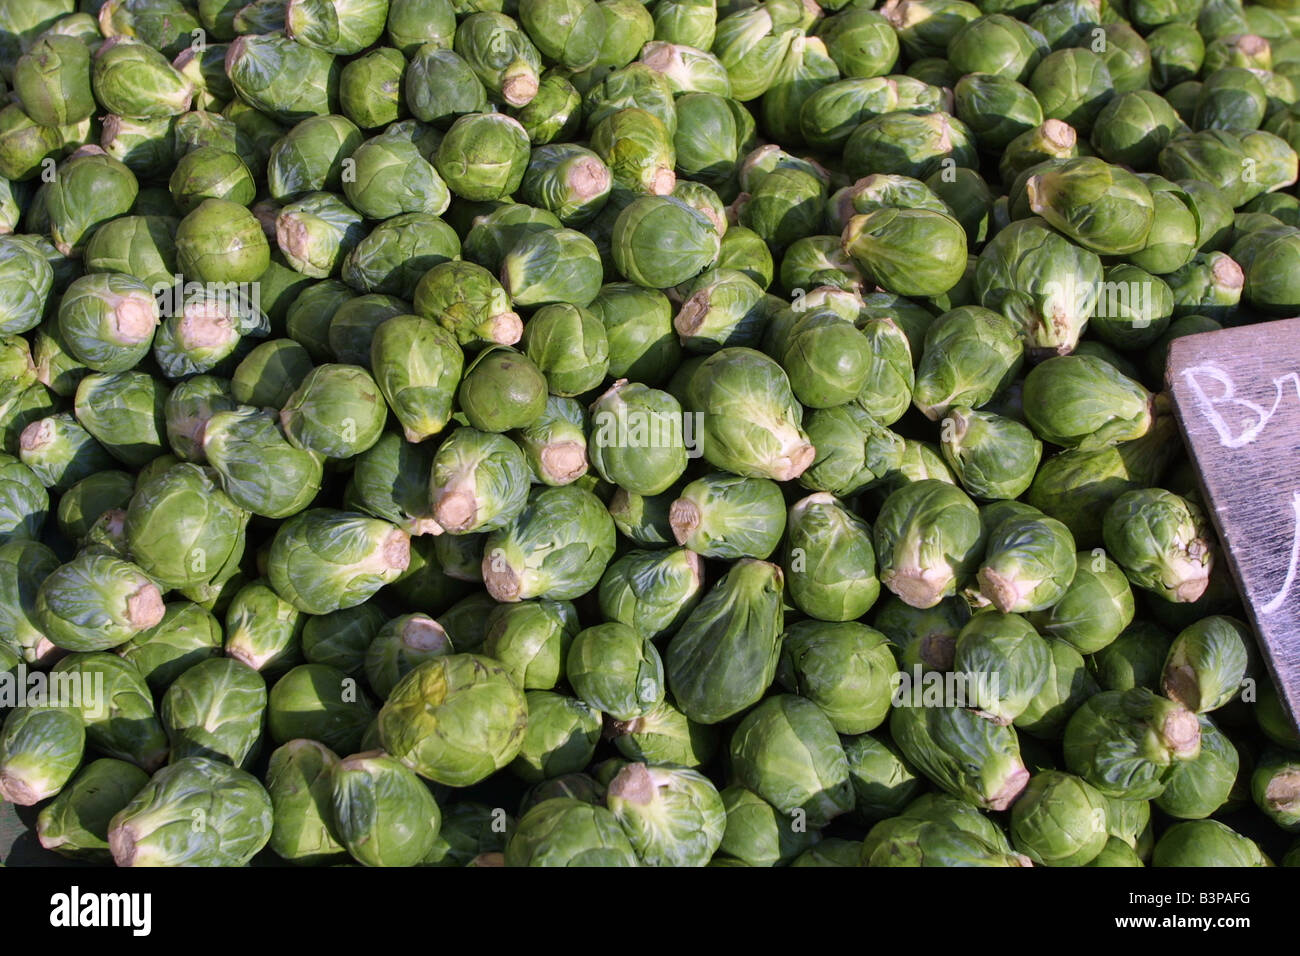 Green brussells sprouts for sale on market. France Bussellsprout 10157 Stock Photo